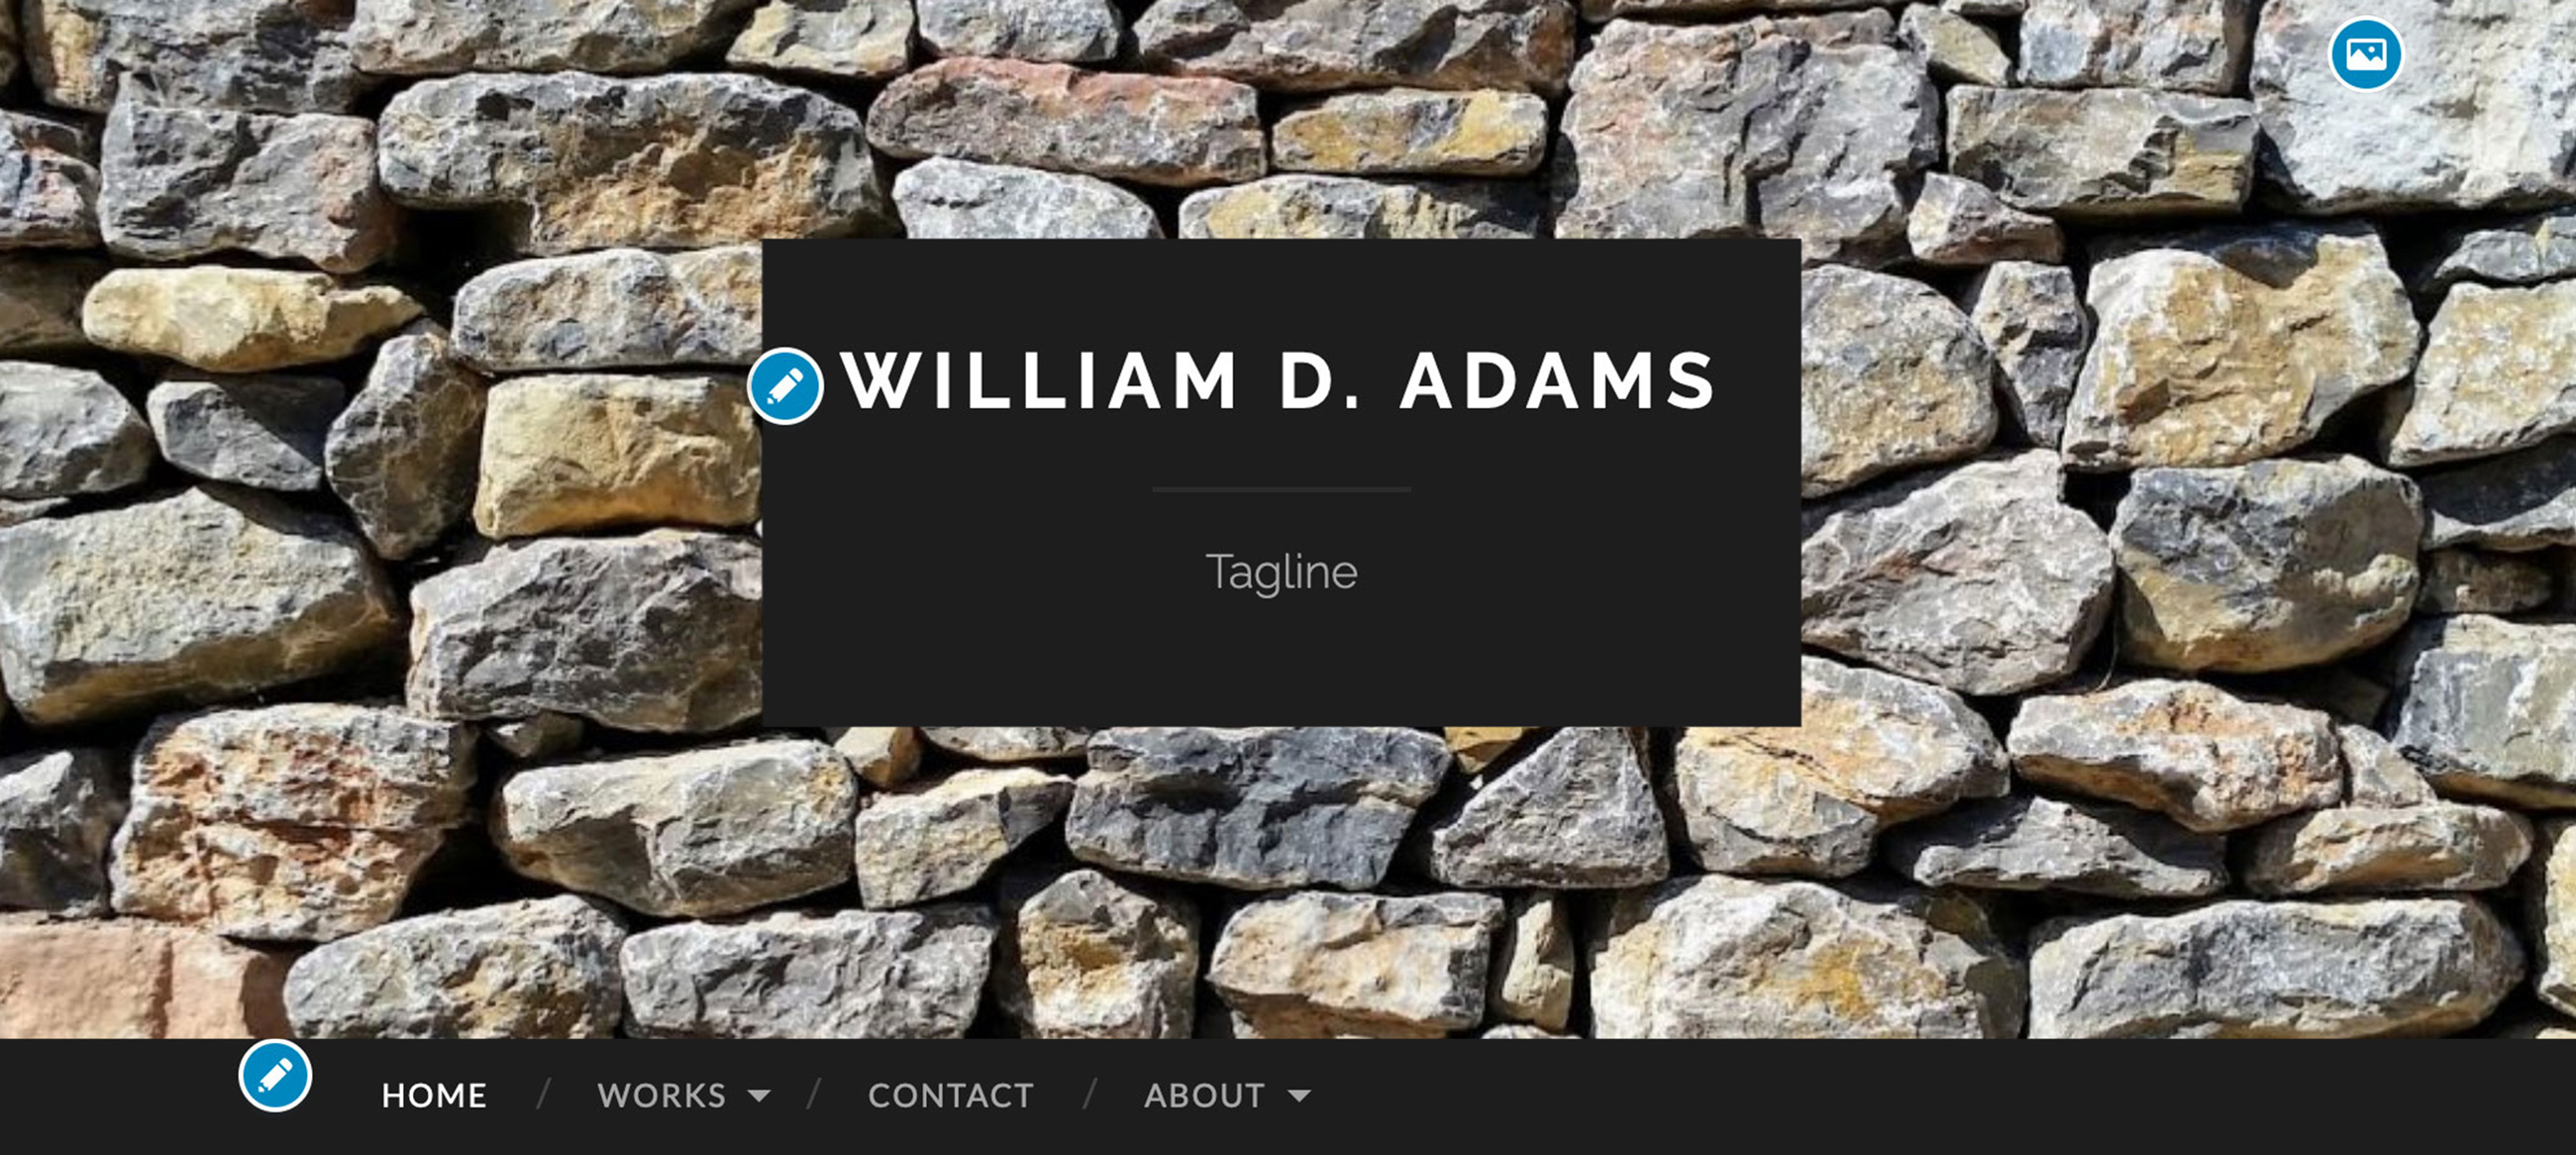 Possible hero image for WordPress blog, an ancient wall made of irregular grey and brown stones. The author's name and sample tagline are in a black frame in the center. The nav, which is white and light-grey text against a black background, is below.